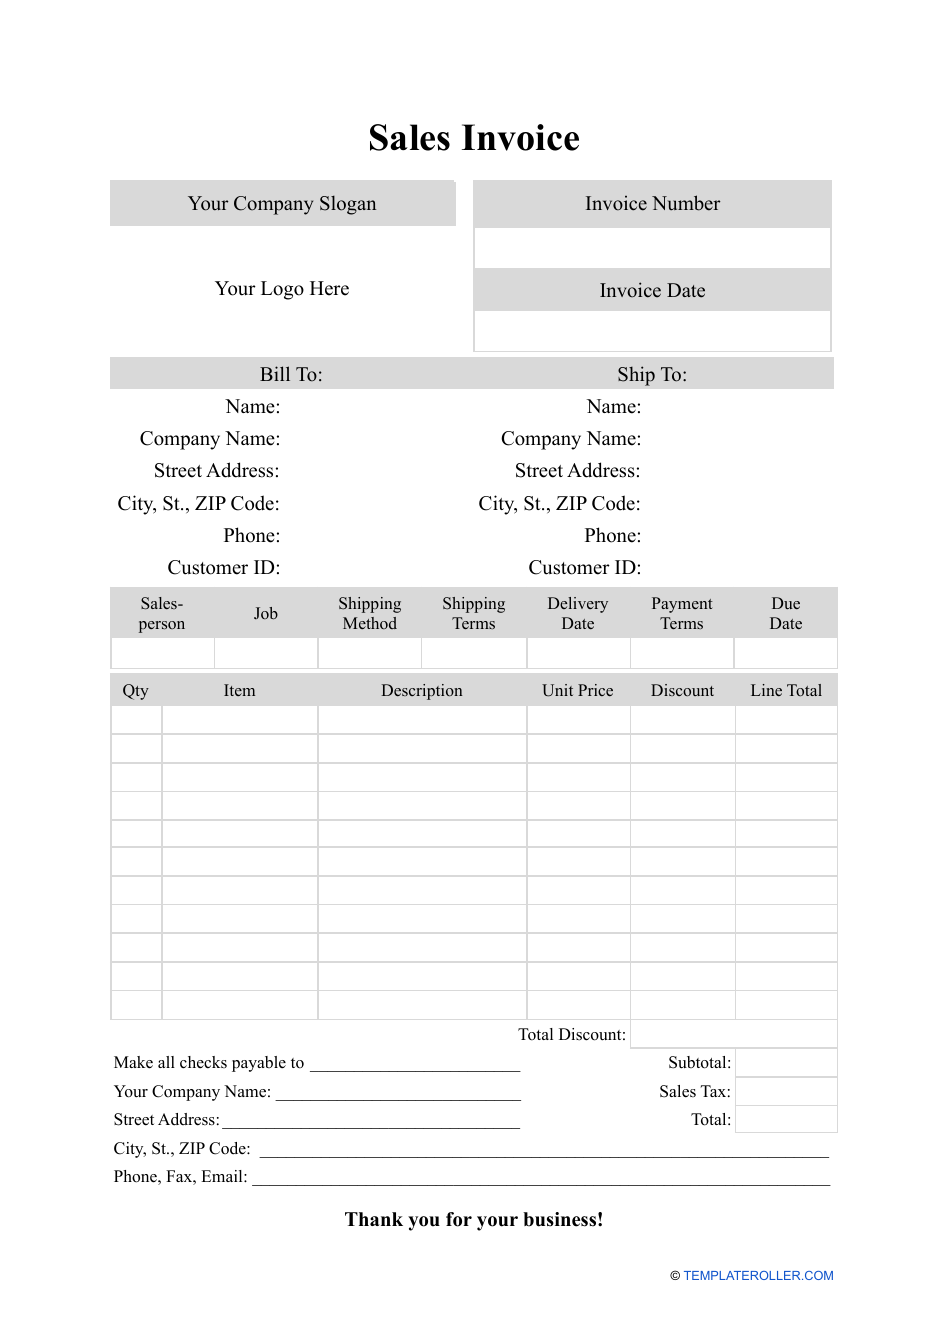 Sales Invoice Template, Page 1